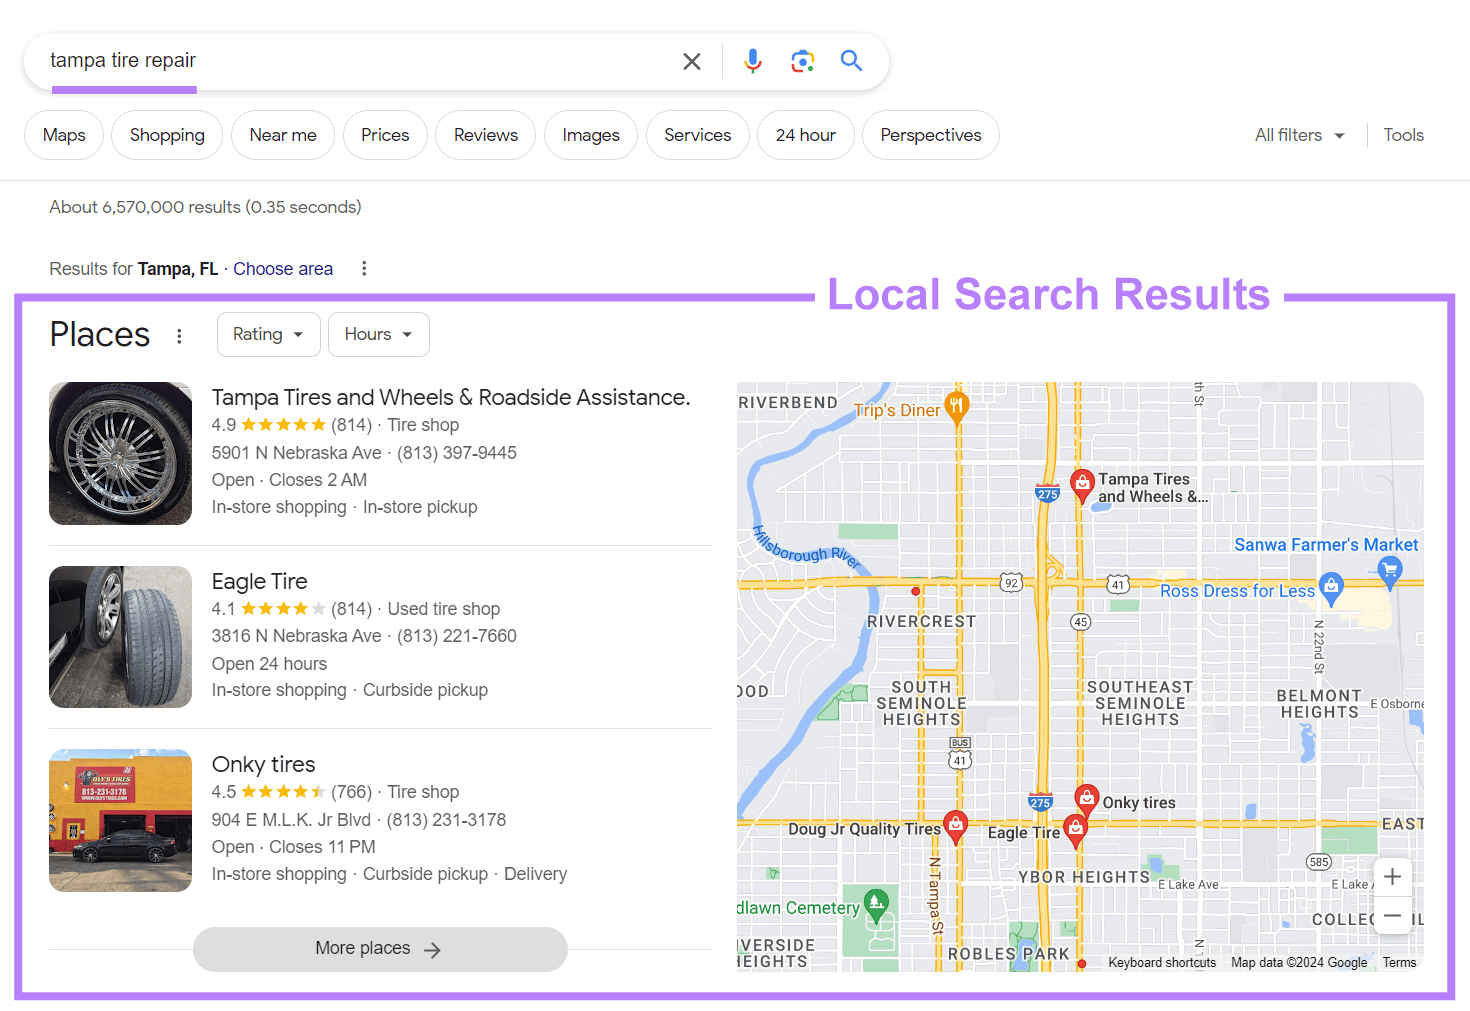 Google local search results for "tampa tire repair"